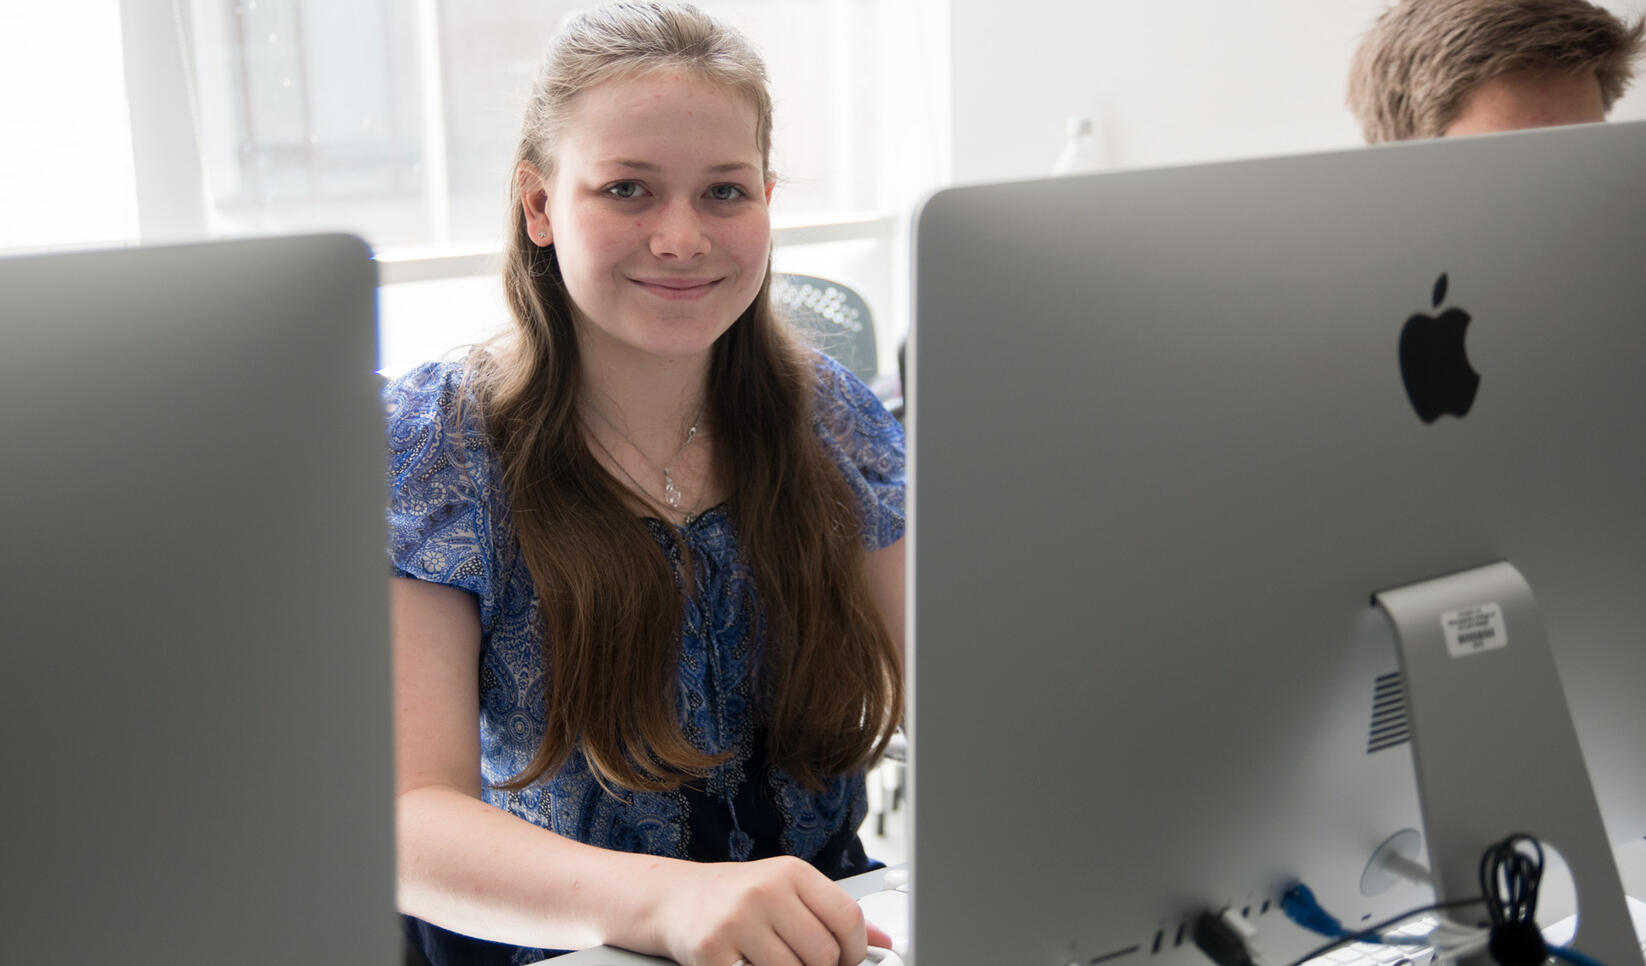 Student at computer smiling